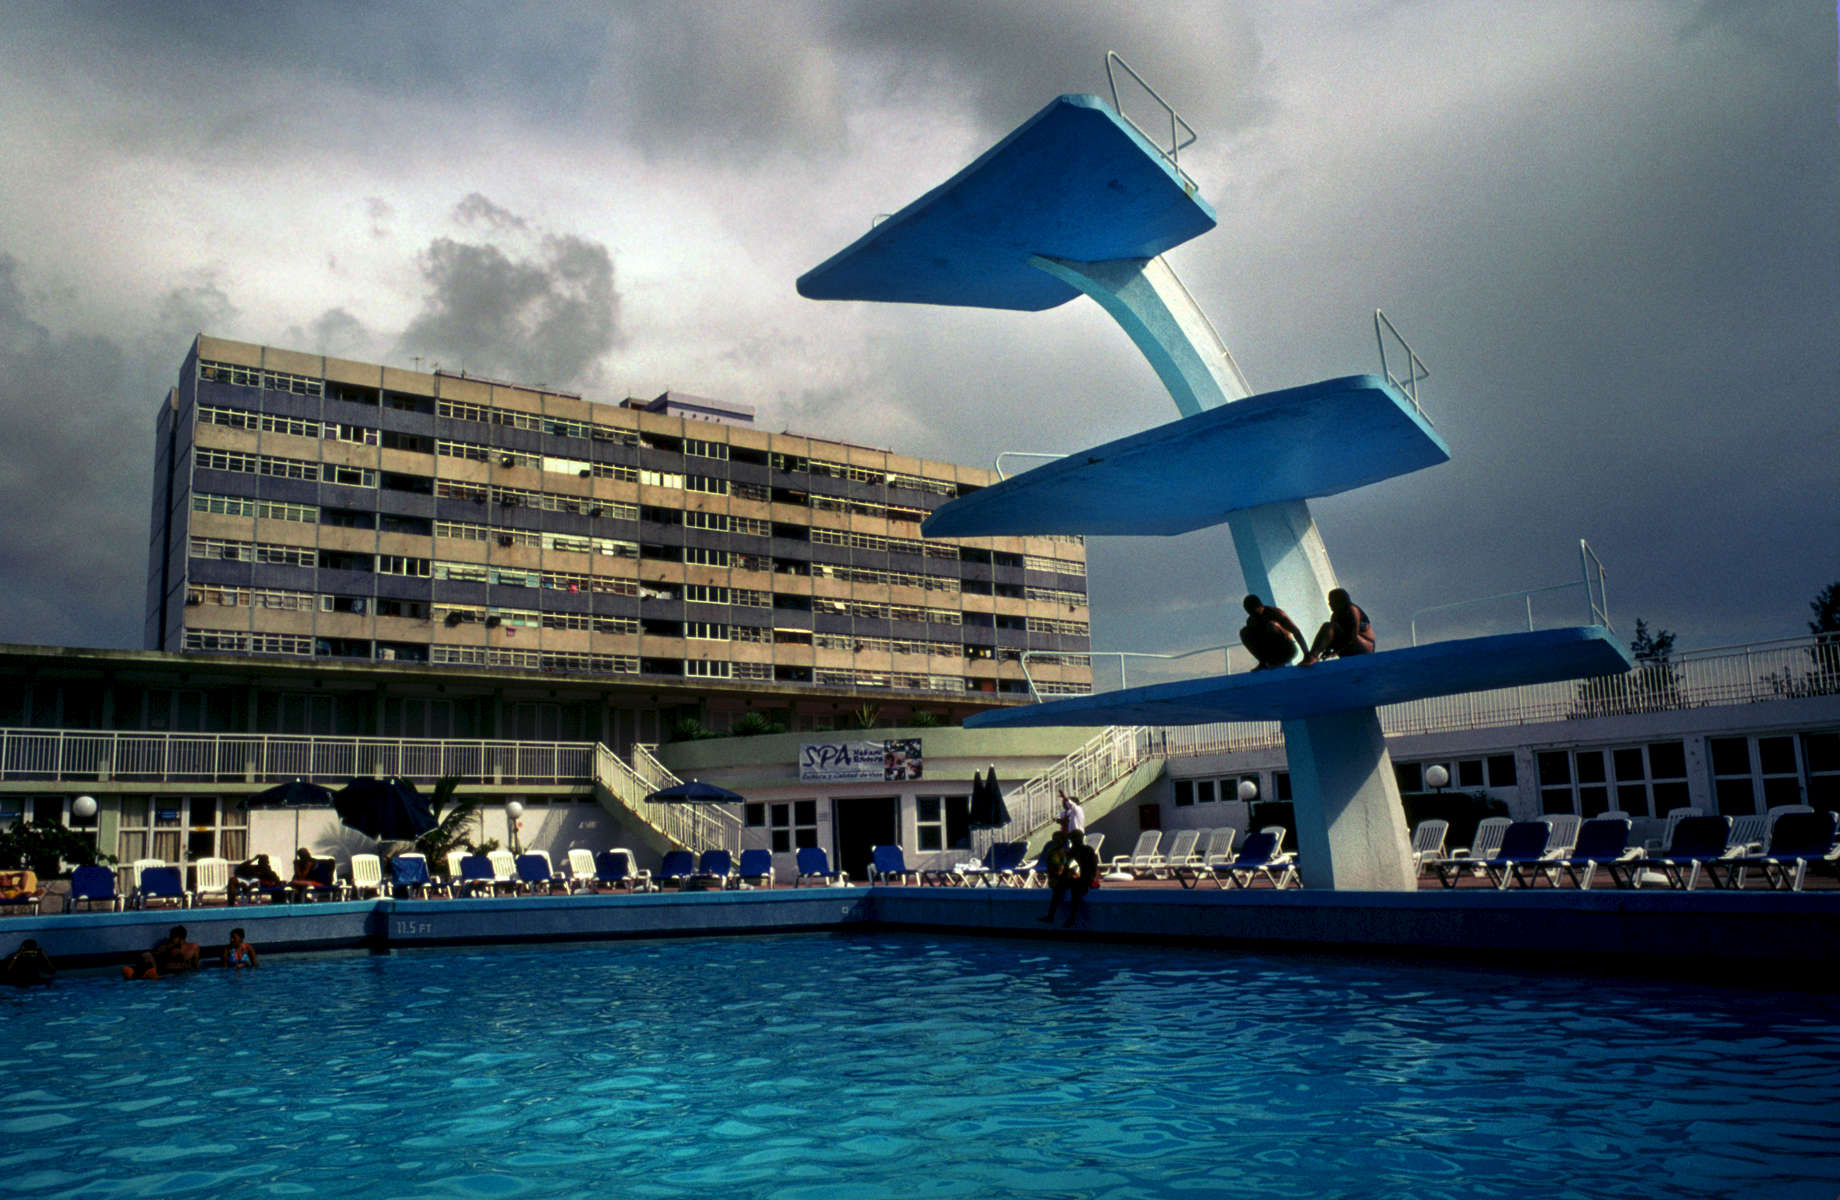 Many tourists bask in the summer sun, blistering their skin at one of the many hotel pools and resorts. For many years, Cubans were not allowed access to the hotels or resorts and their amenities. Today, some hotels will allow Cubans, for a small fee, to enter their premises allowing access to the pools, restaurants, and bars, yet it can still be cost prohibitive for many local people.  Hotel Habana Riviera is a popular, late 1950's, art deco-styled hotel, which was being built in the midst of the revolutionary upheavel. It was envisioned as the {quote}The Riviera of the Caribbean,{quote} as it was considered the epitome of resort-construction, with the first of its kind to have ariconditioned rooms. A concrete, Russian housing development strategically juxtaposes the background of the art-deco, architecture of the Riviera, reminding its guests of the communist / anti-capitlist regime. 